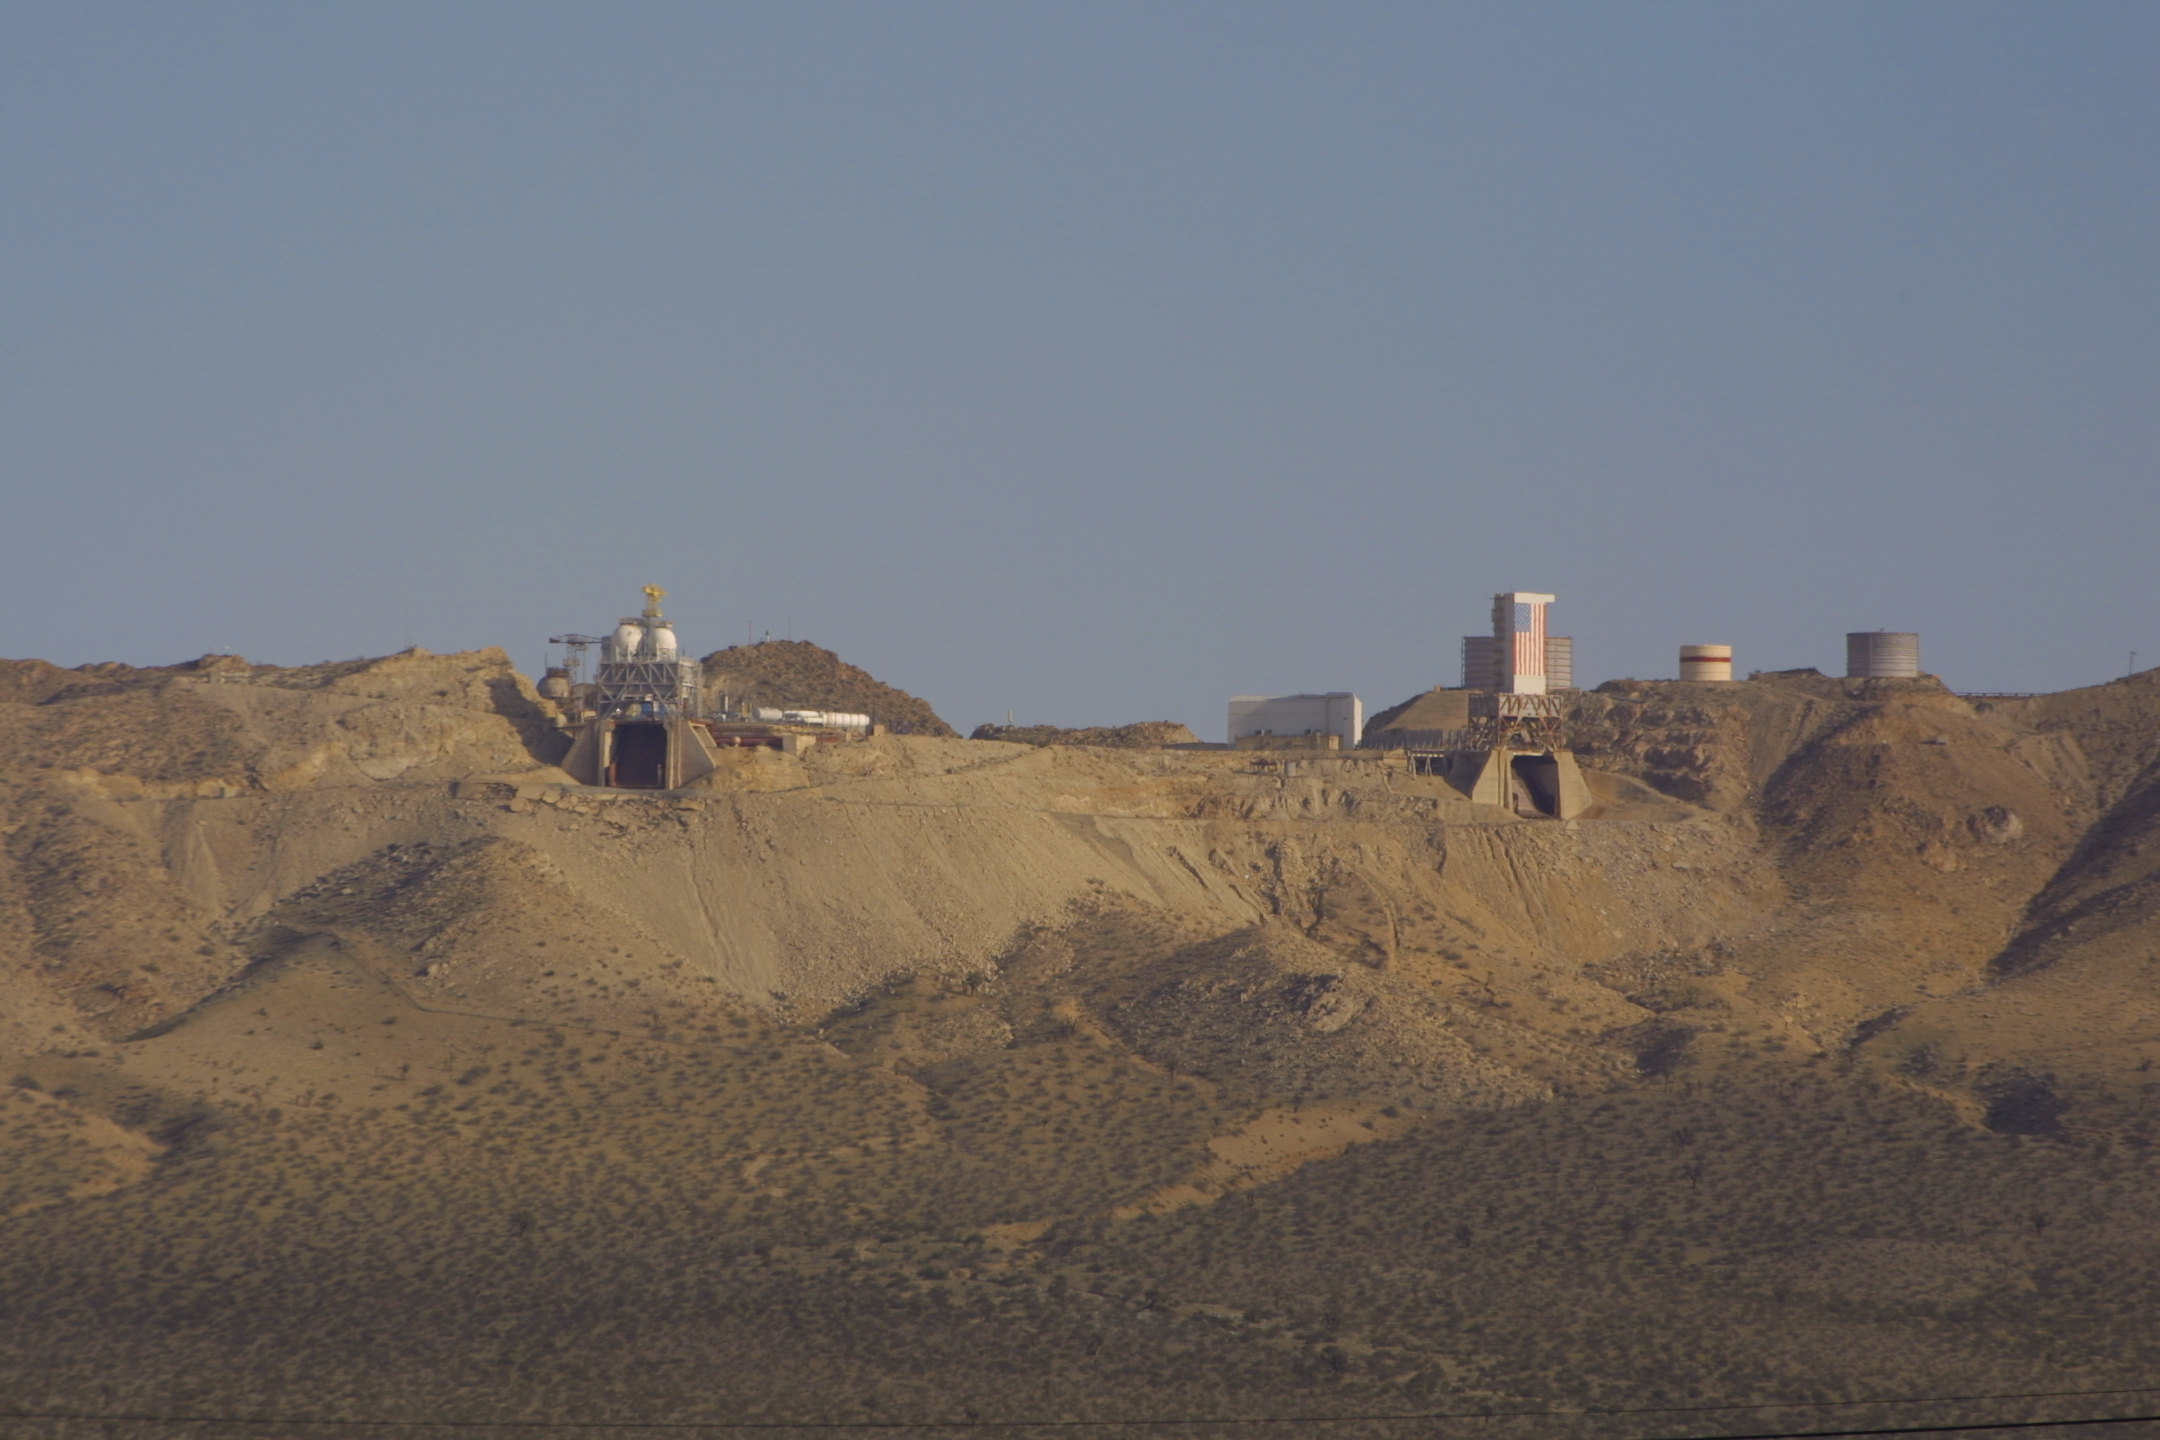 Apollo-era test stands on Leuhman Ridge: 1-D (L) and 1-C (R). Test Stand 1-C has been modified from its original configuration with the addition of a white tower on top, but 1-D looks about as it did in the 1960s. Test Stand 1-B is out of view to the right.